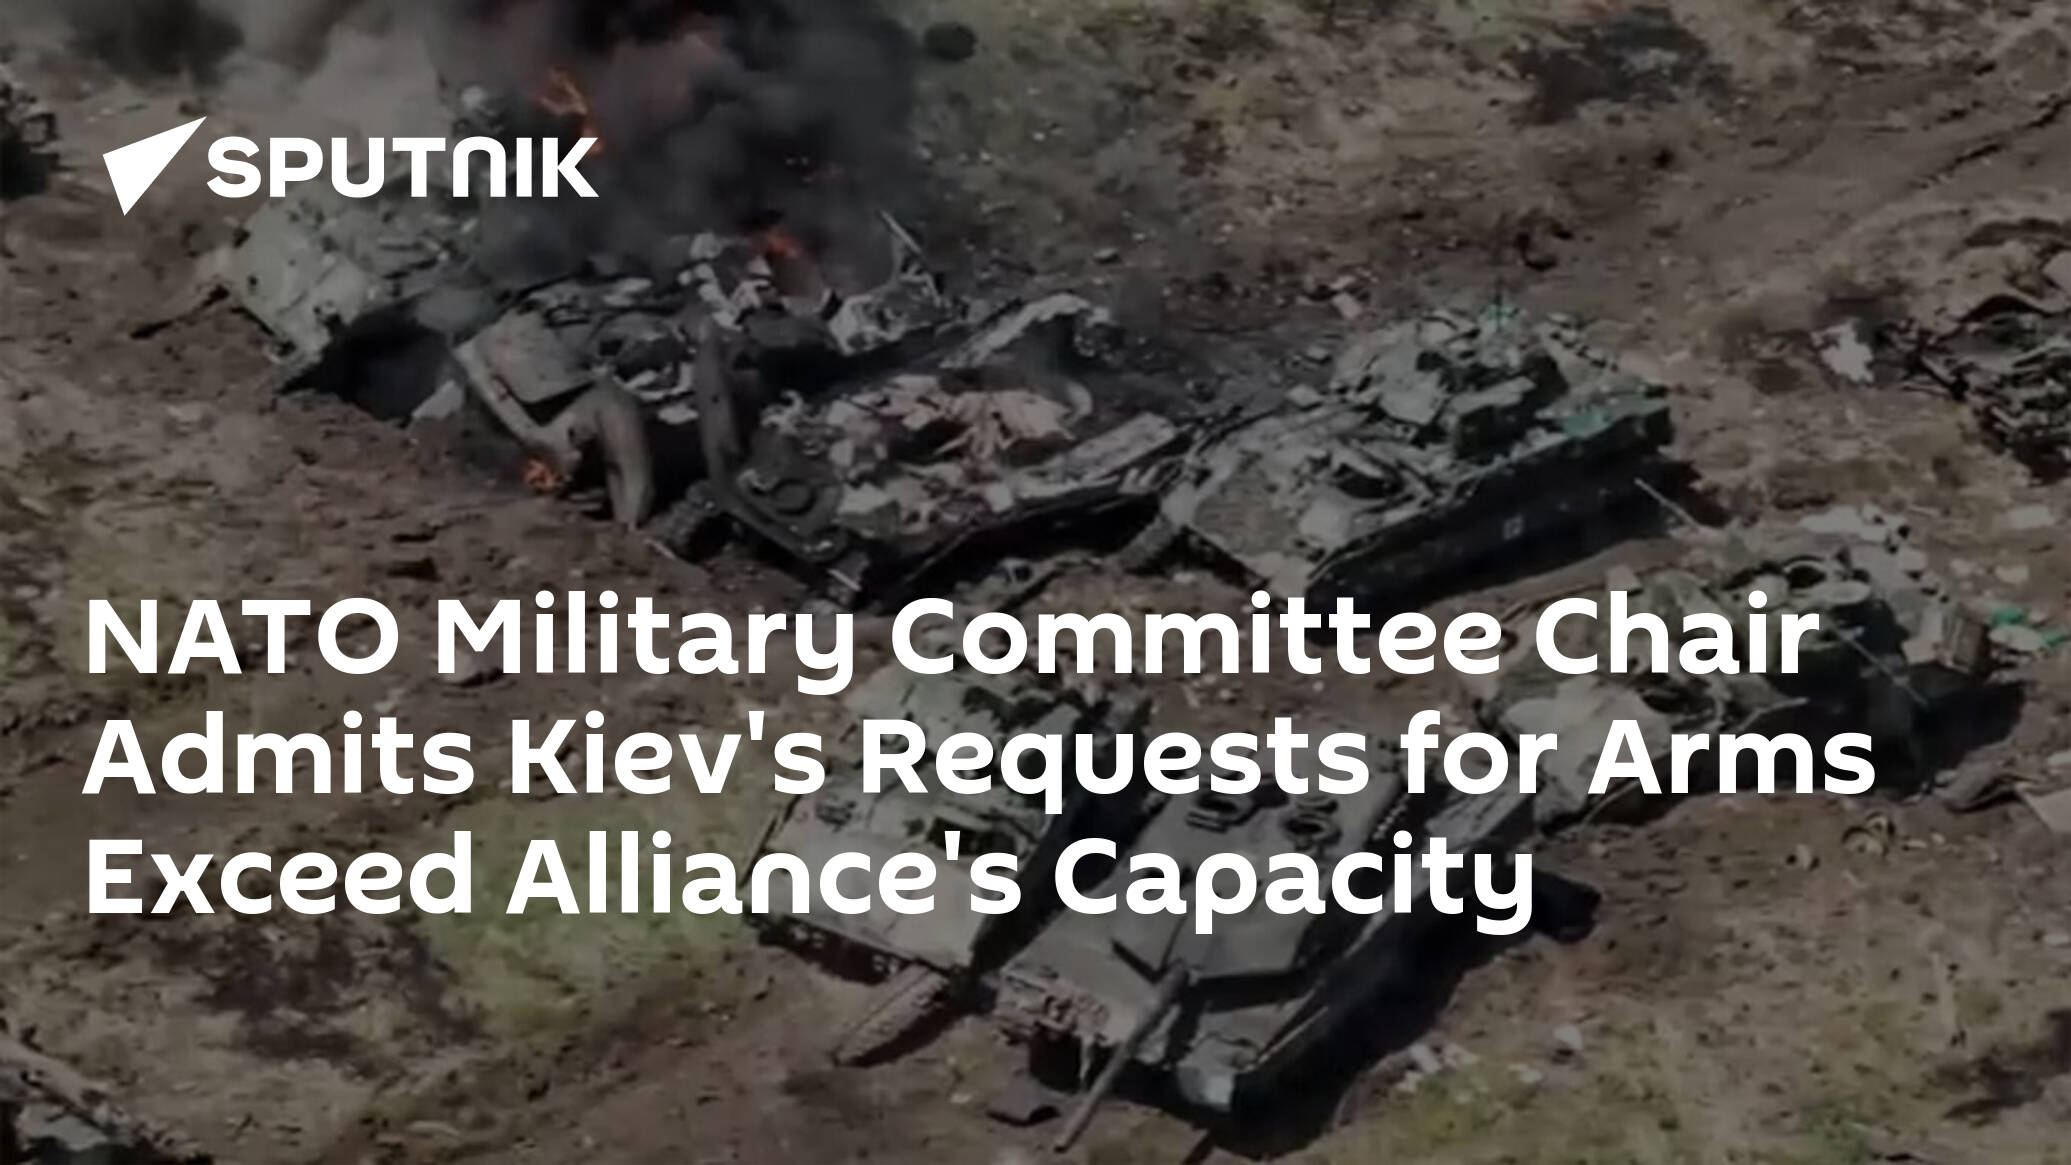 NATO Military Committee Chair Admits Kiev's Requests for Arms Exceed Alliance's Capacity